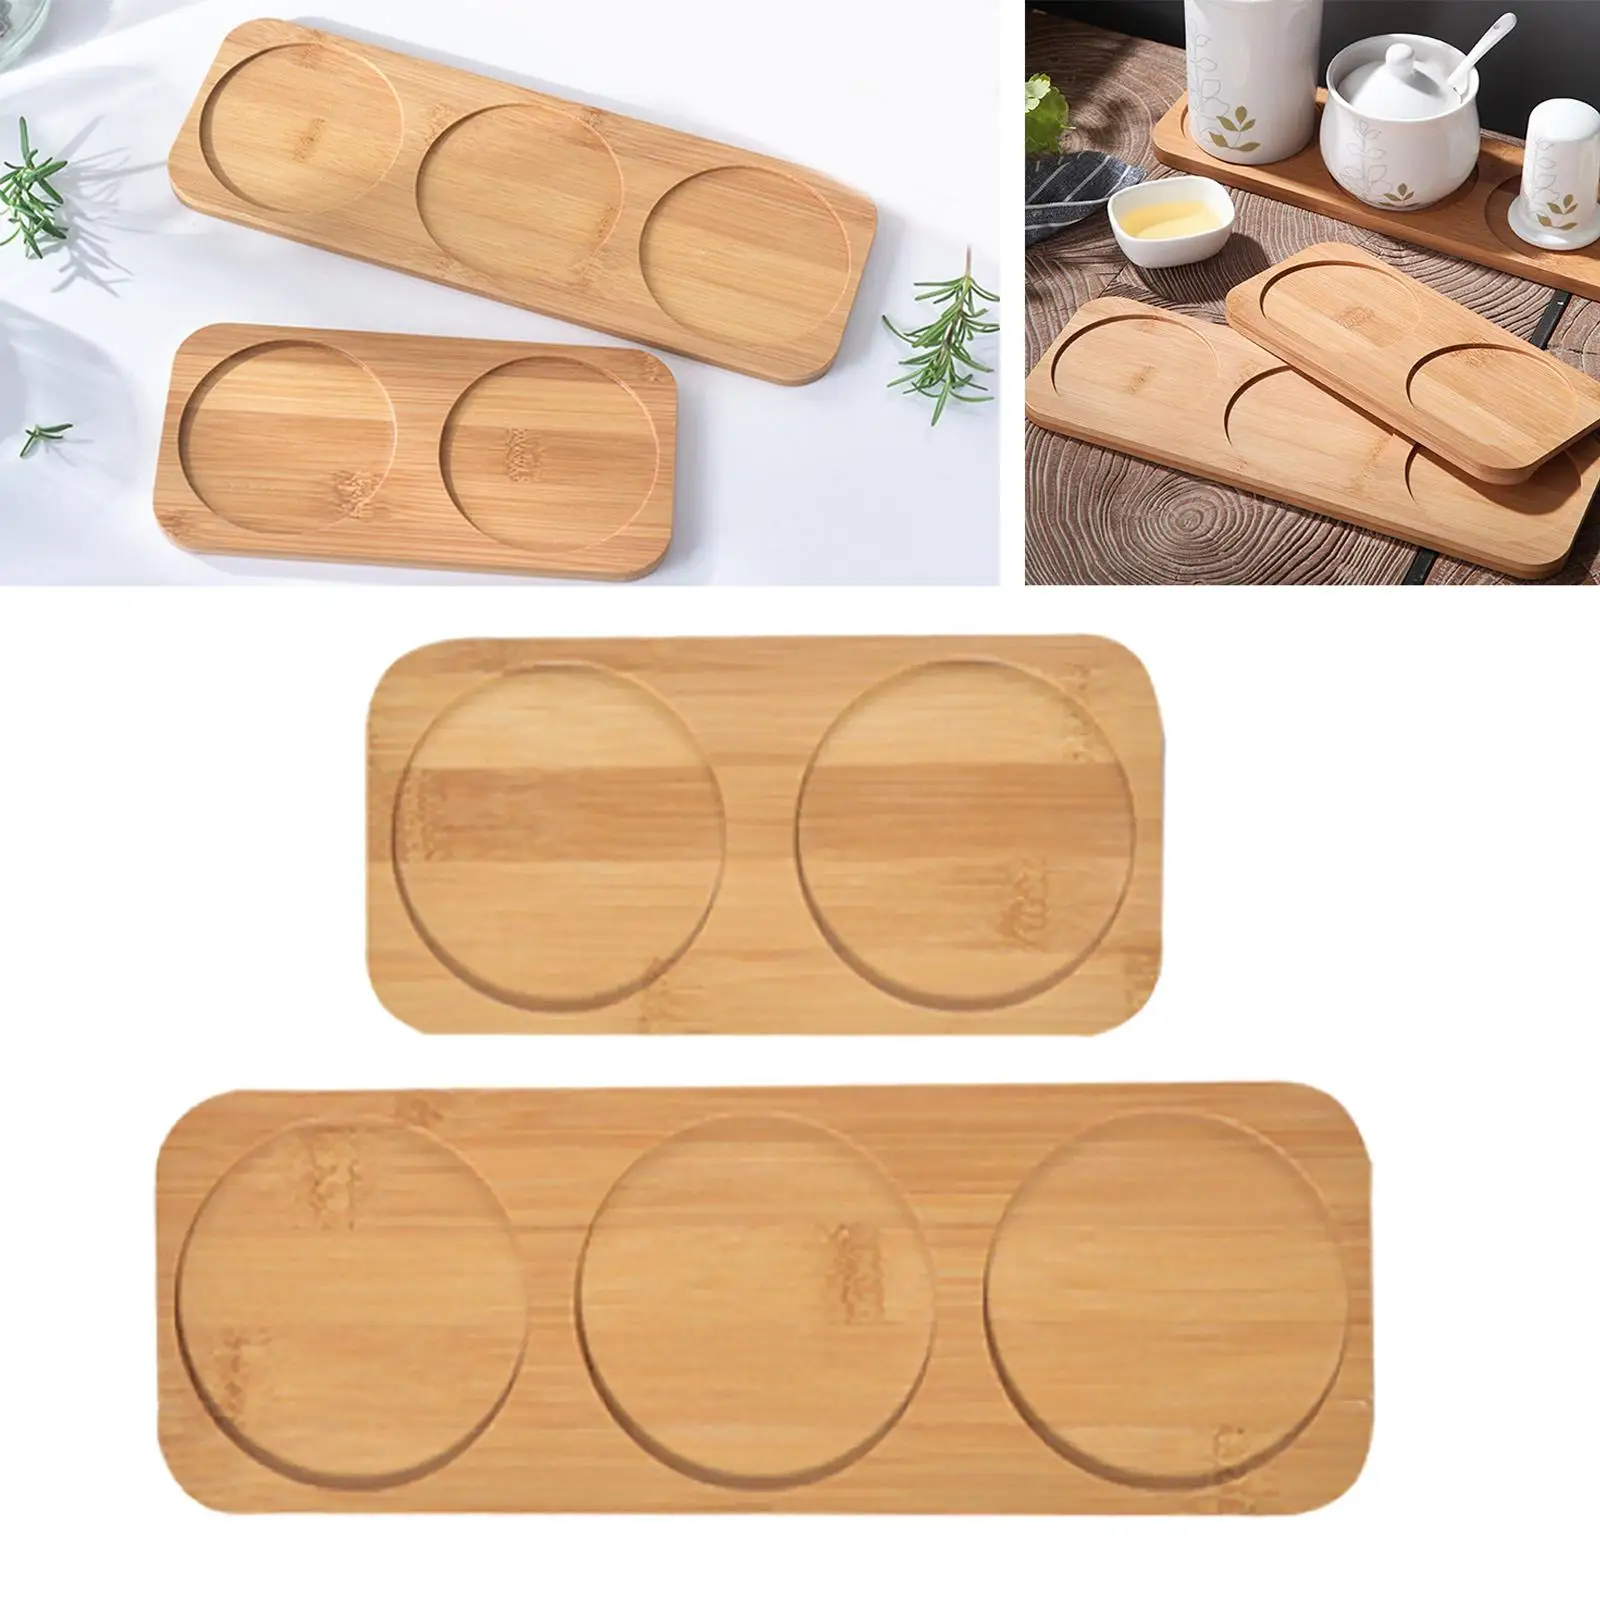 Pepper Mill Tray Rectangular Shape Kitchen Tools Bamboo Wood Wood Tray for Salt Pepper Spice Deli Boards Party Displays Picnics